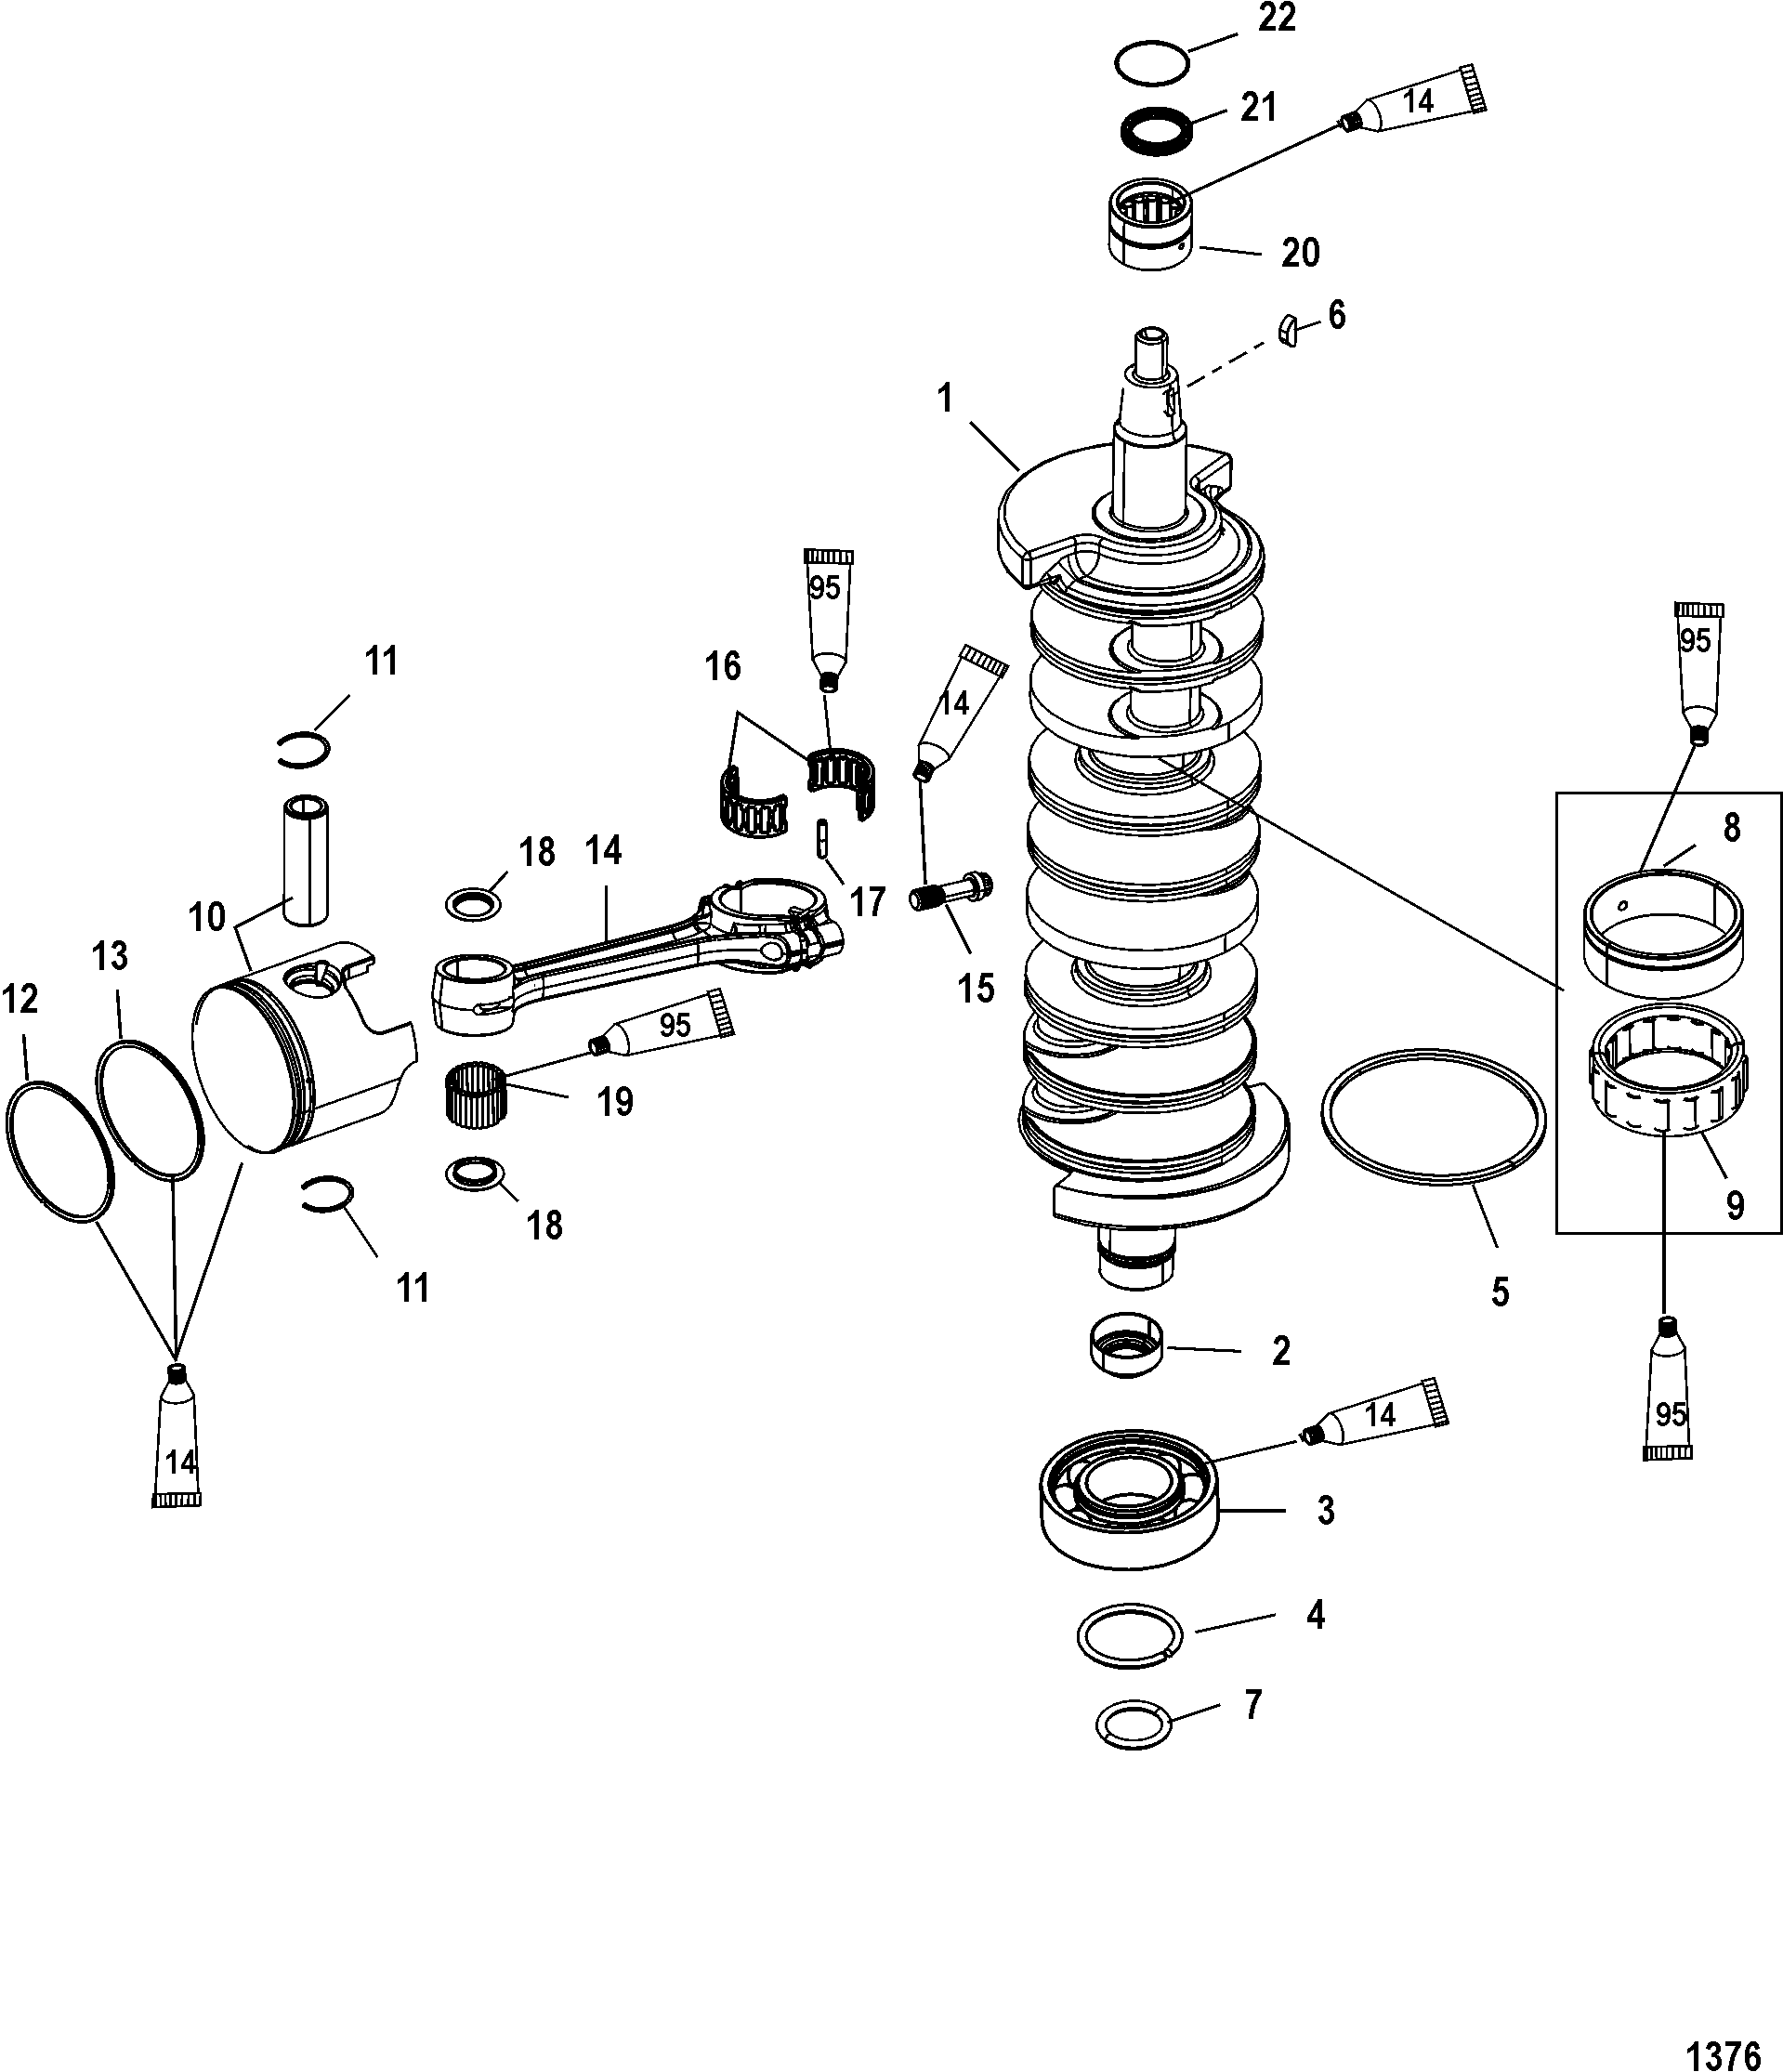 Crankshaft, Pistons and Connecting Rods